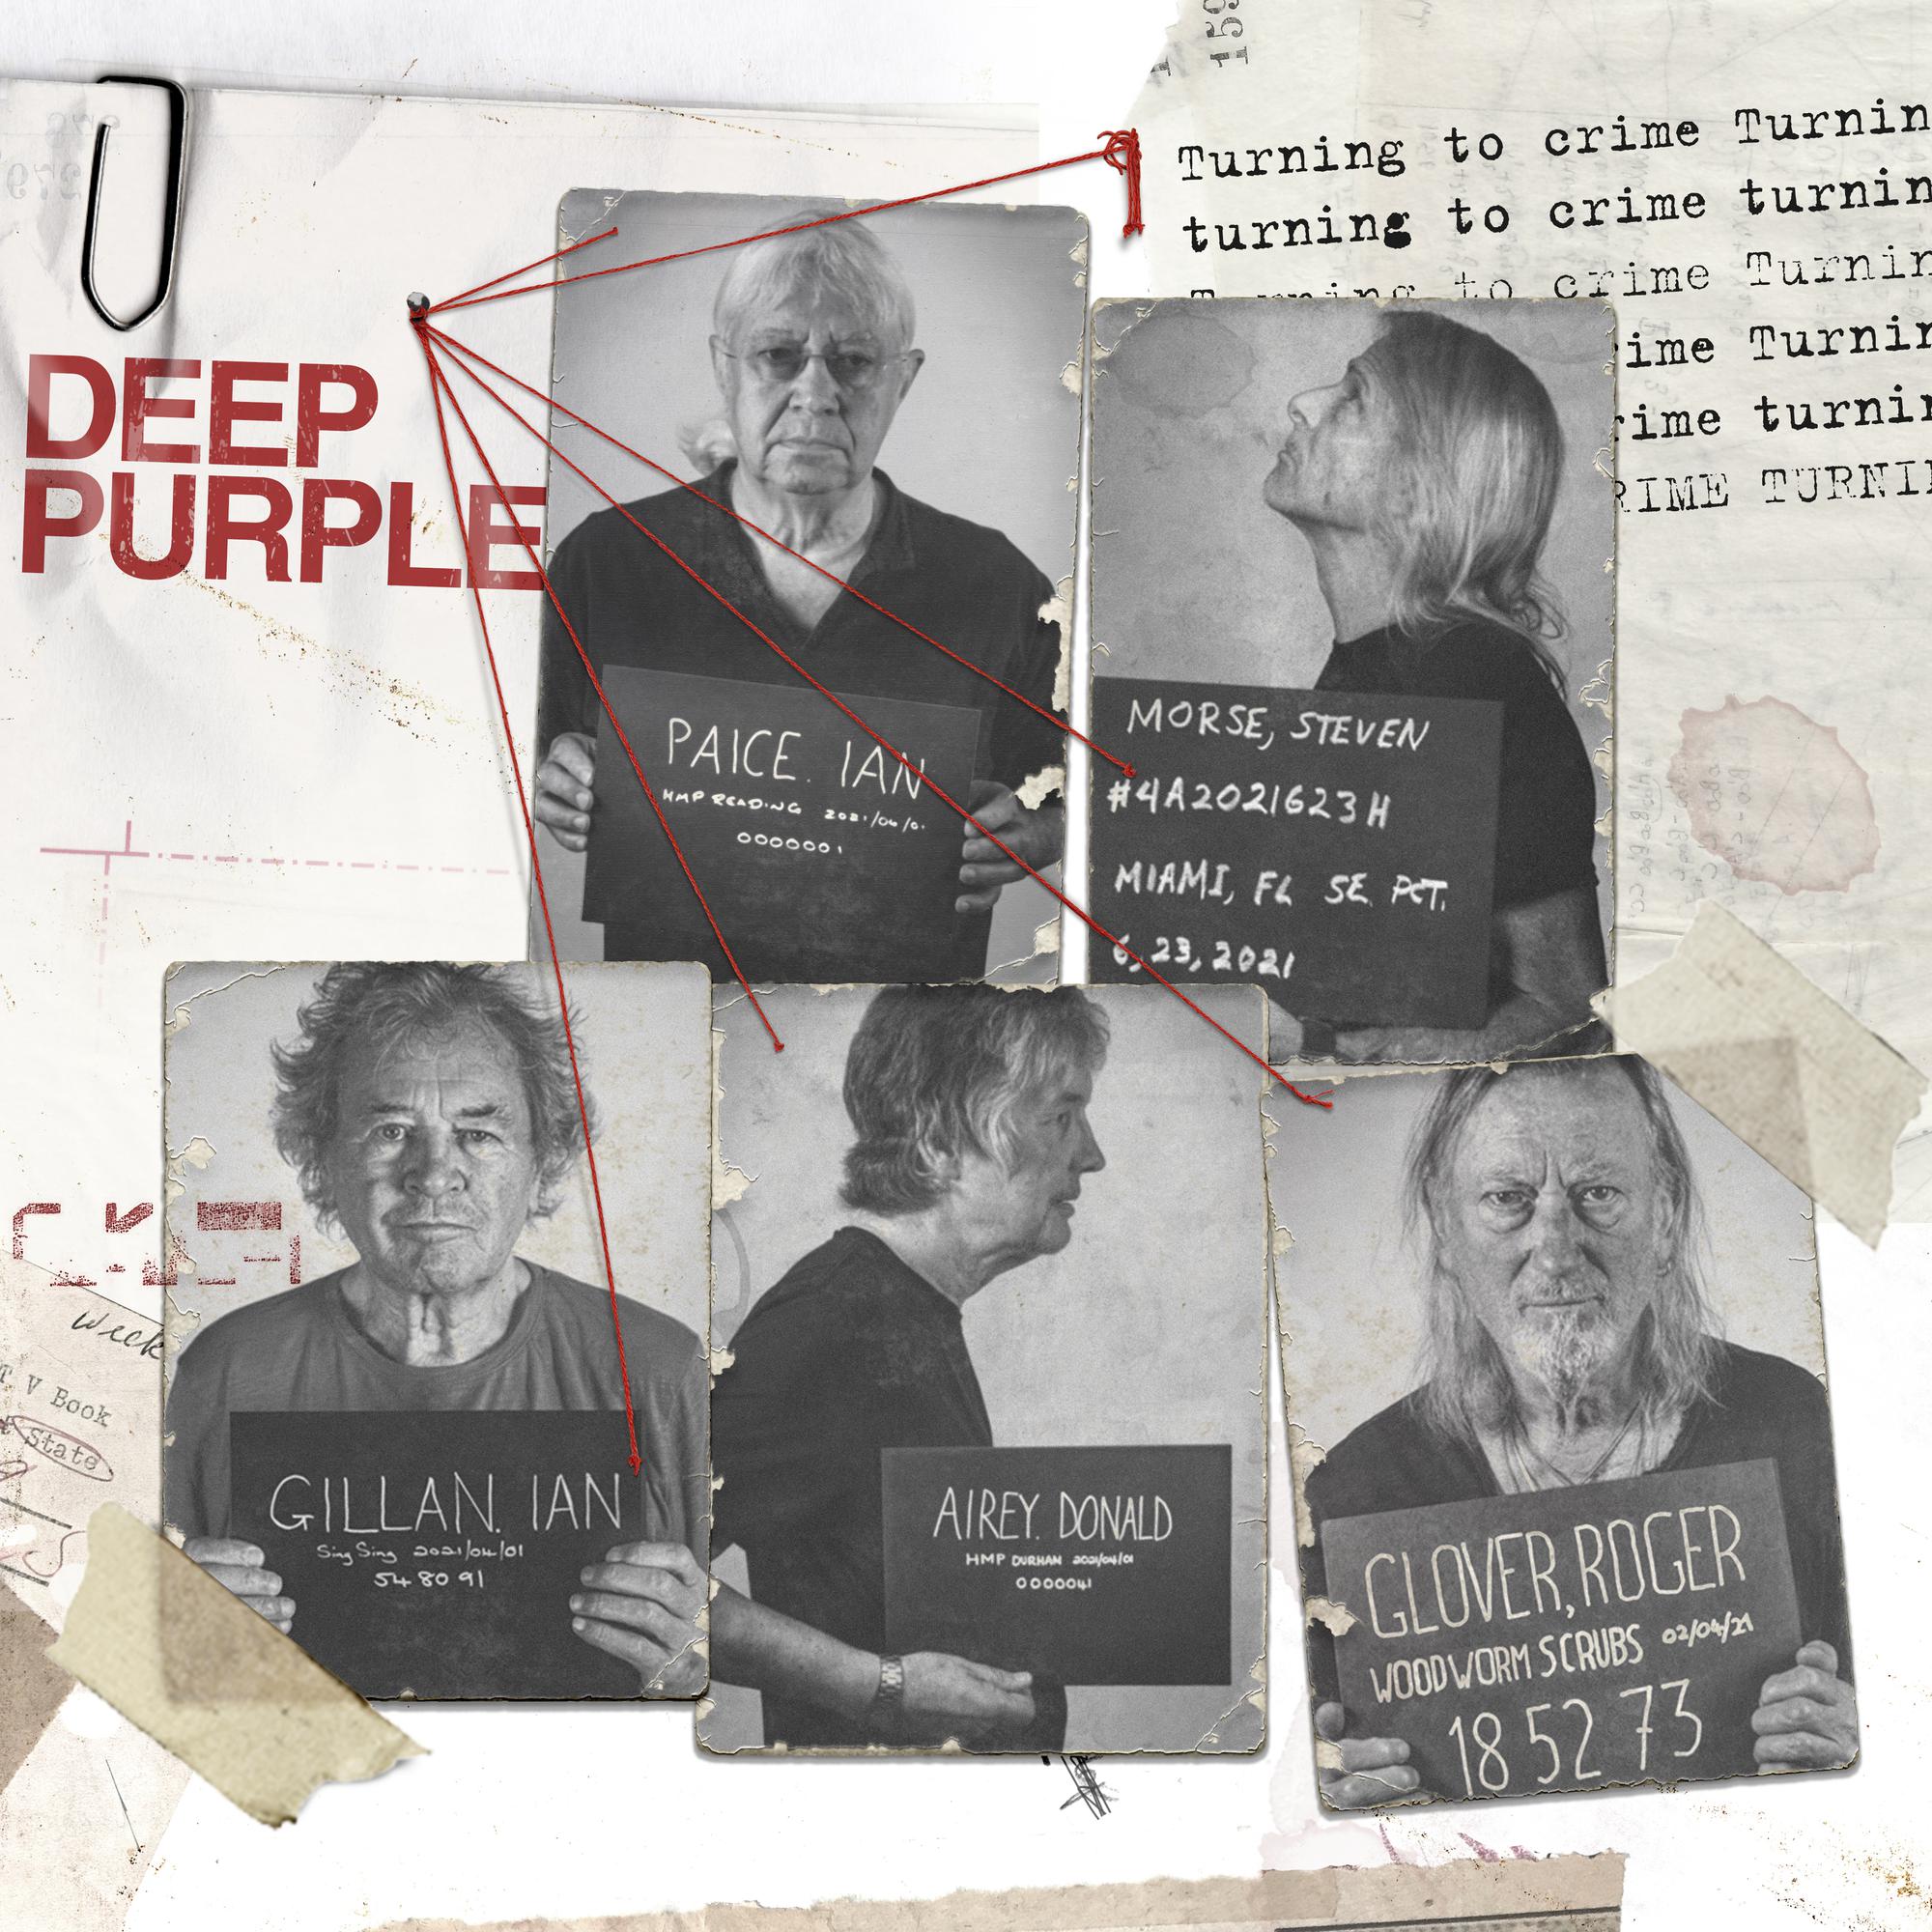 DEEP PURPLE 'TURNING TO CRIME' 6LP BOX SET (Limited Edition)